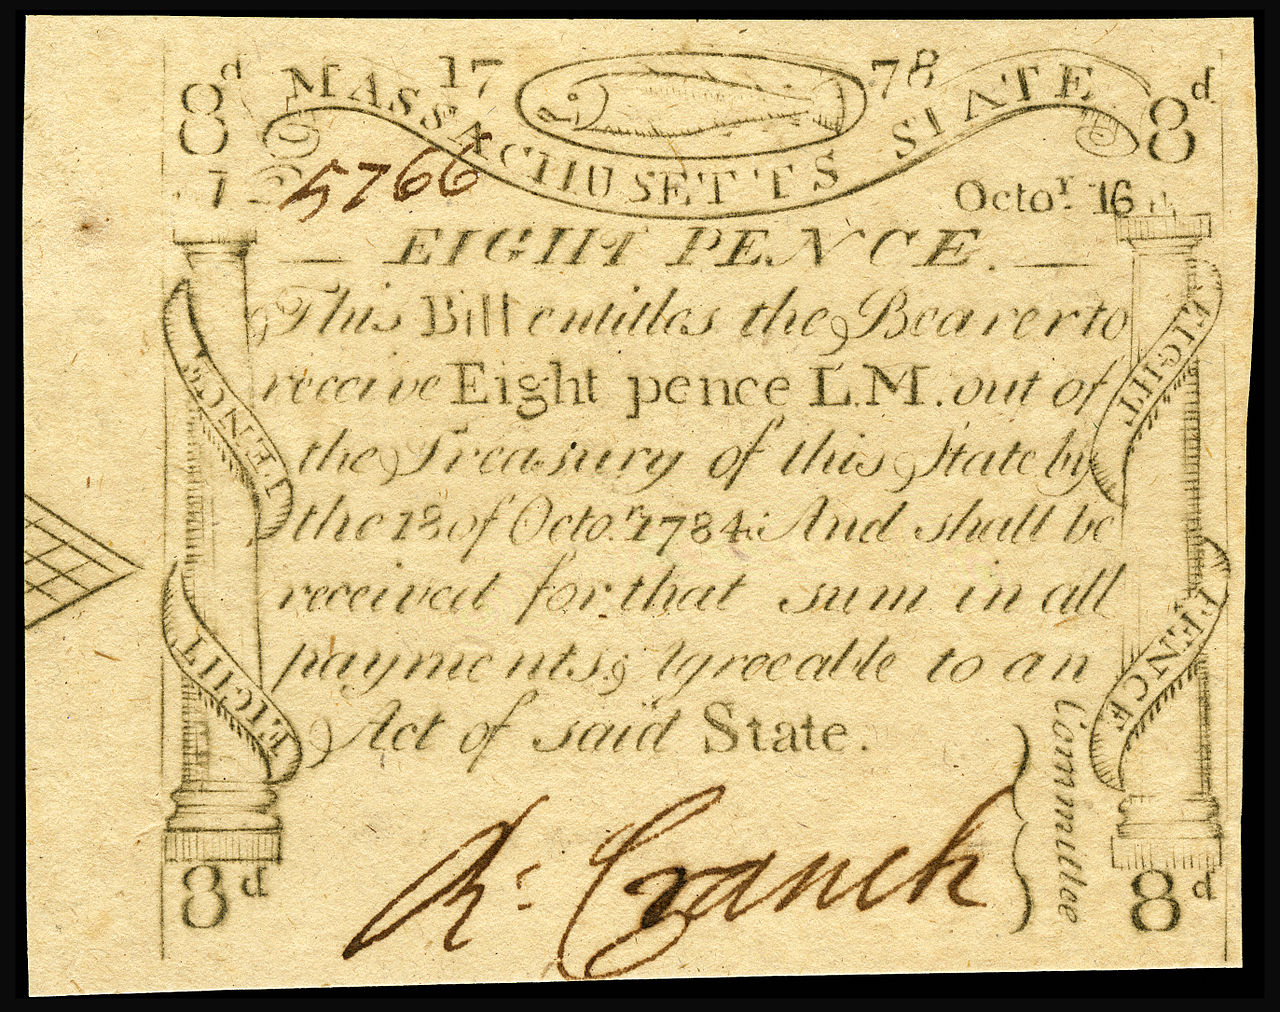 An eight pence note in Massachusetts state currency, issued in 1778. These "codfish" bills, so-called because of the cod in the border design, were engraved and printed by Paul Revere. (Wikimedia commons)